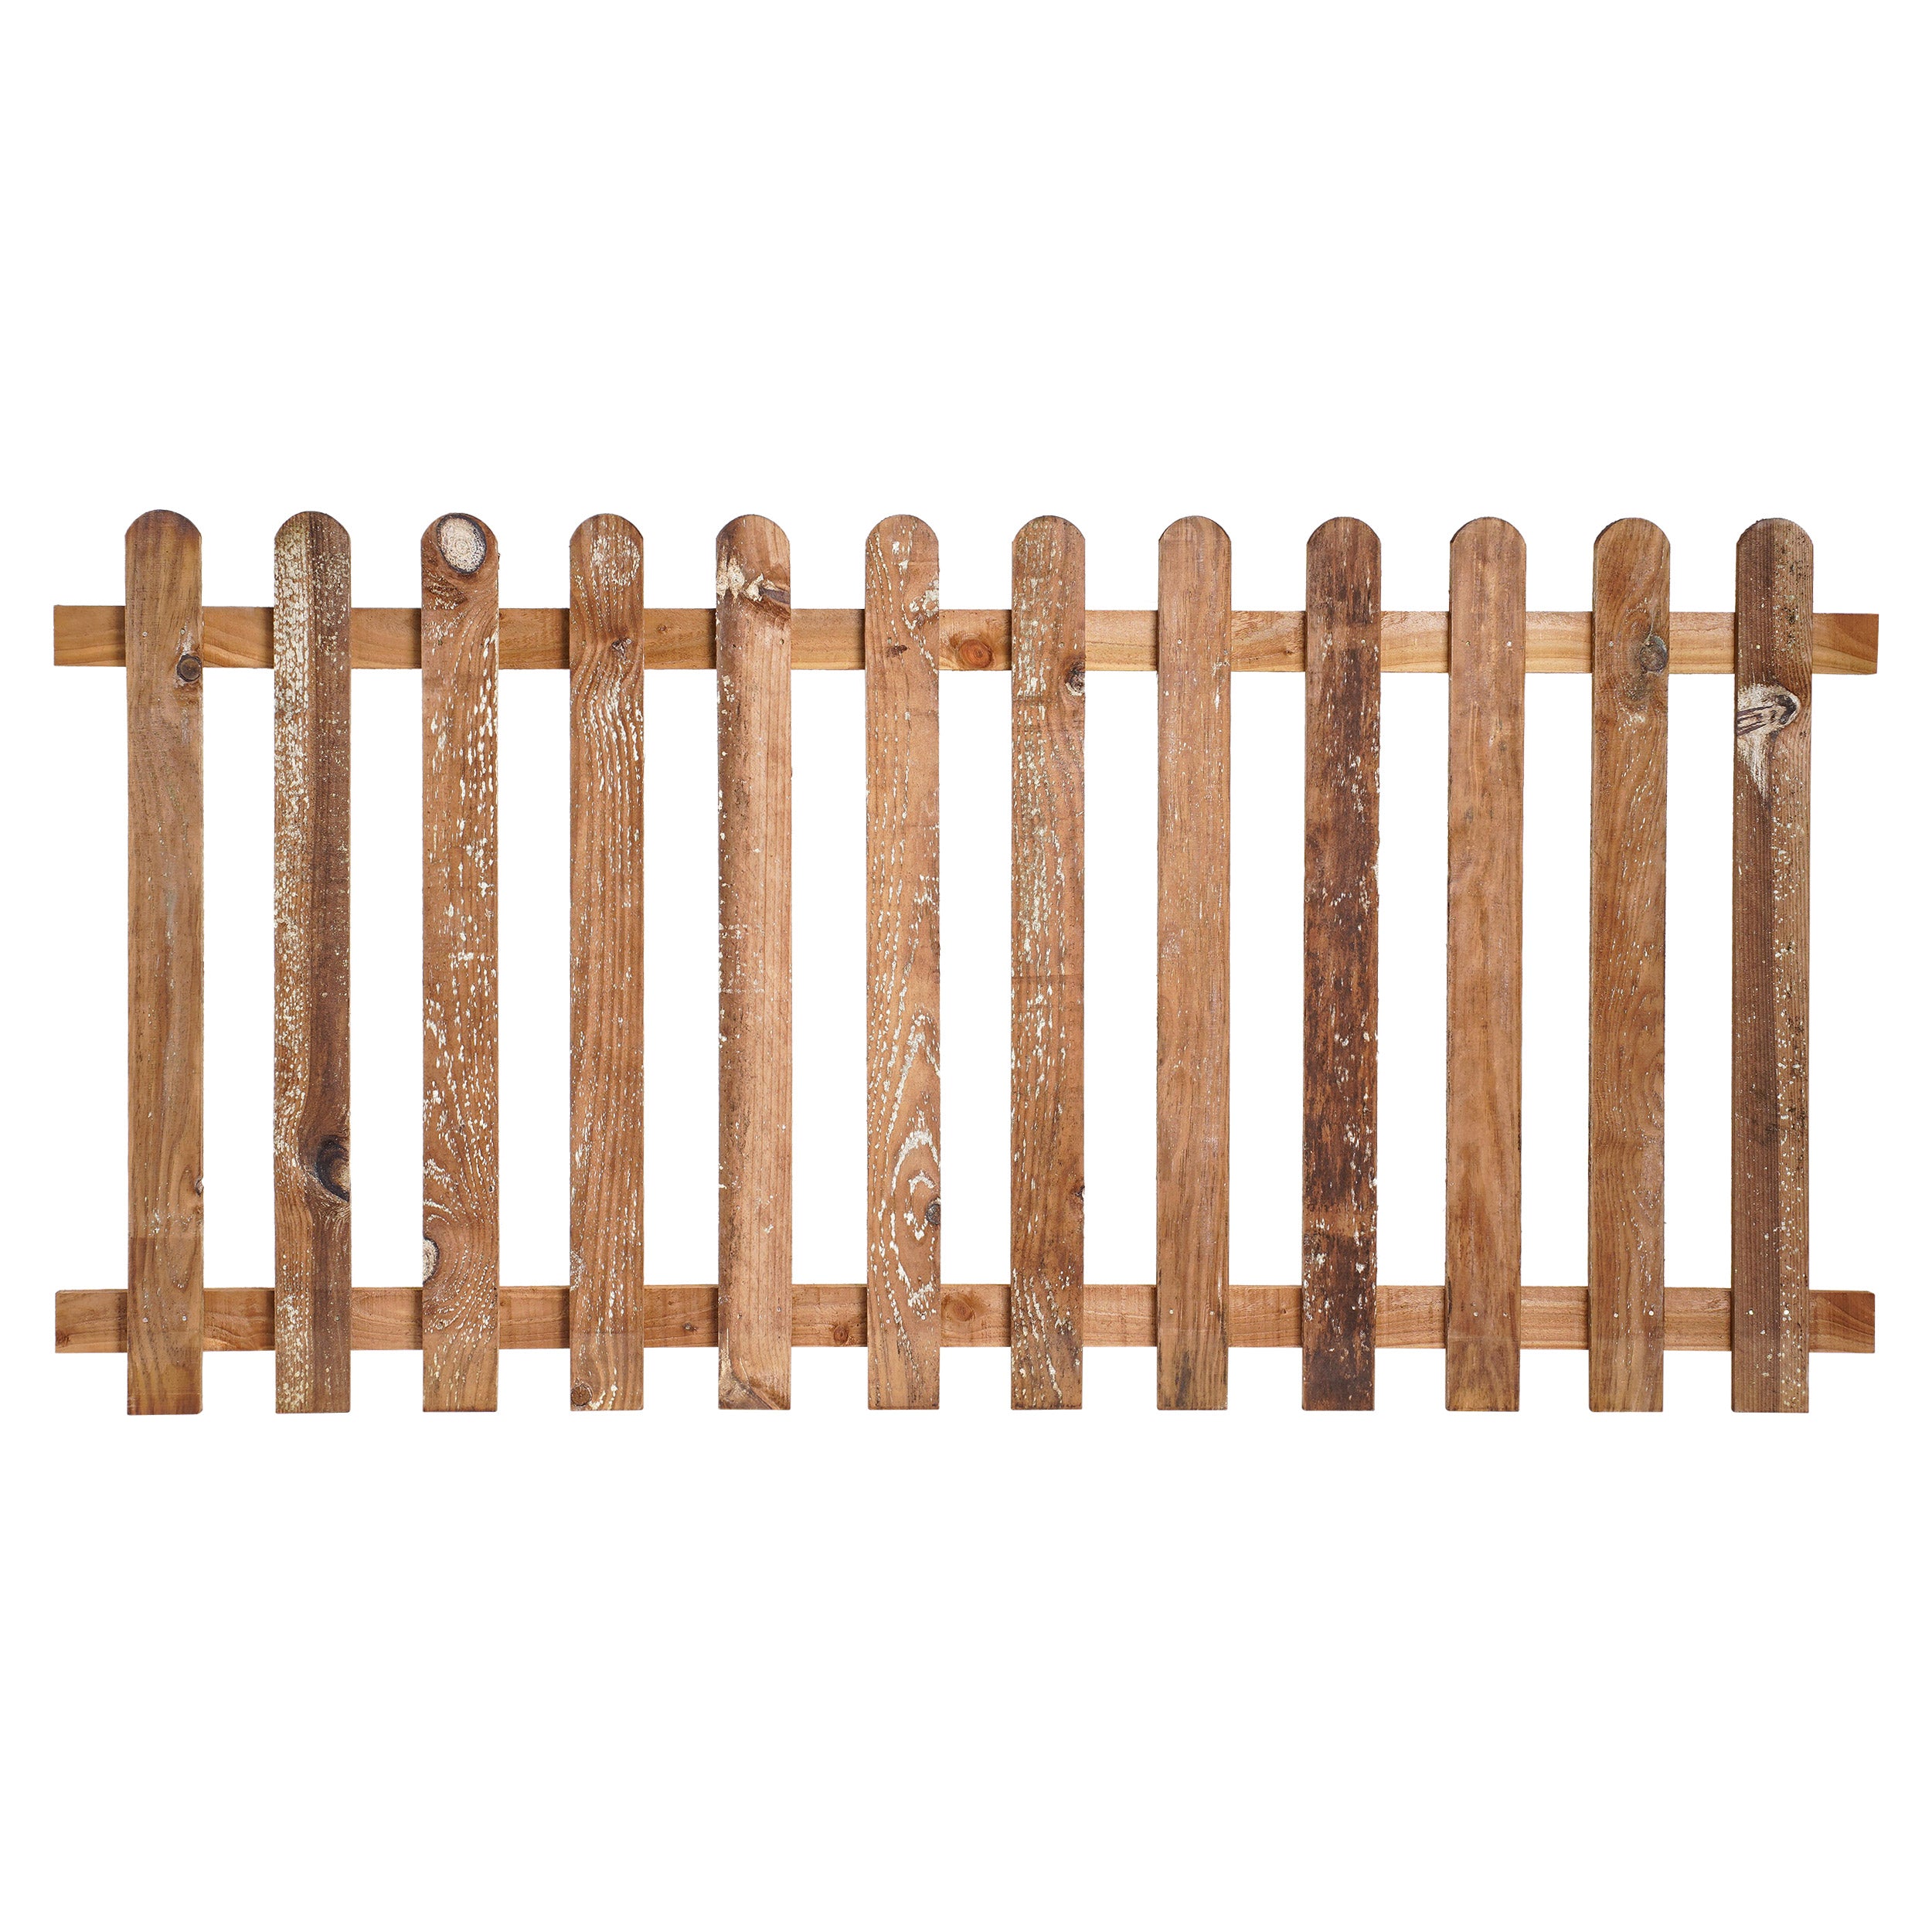 6ft x 3ft Picket Fence Panel Round Top - Pressure Treated Brown